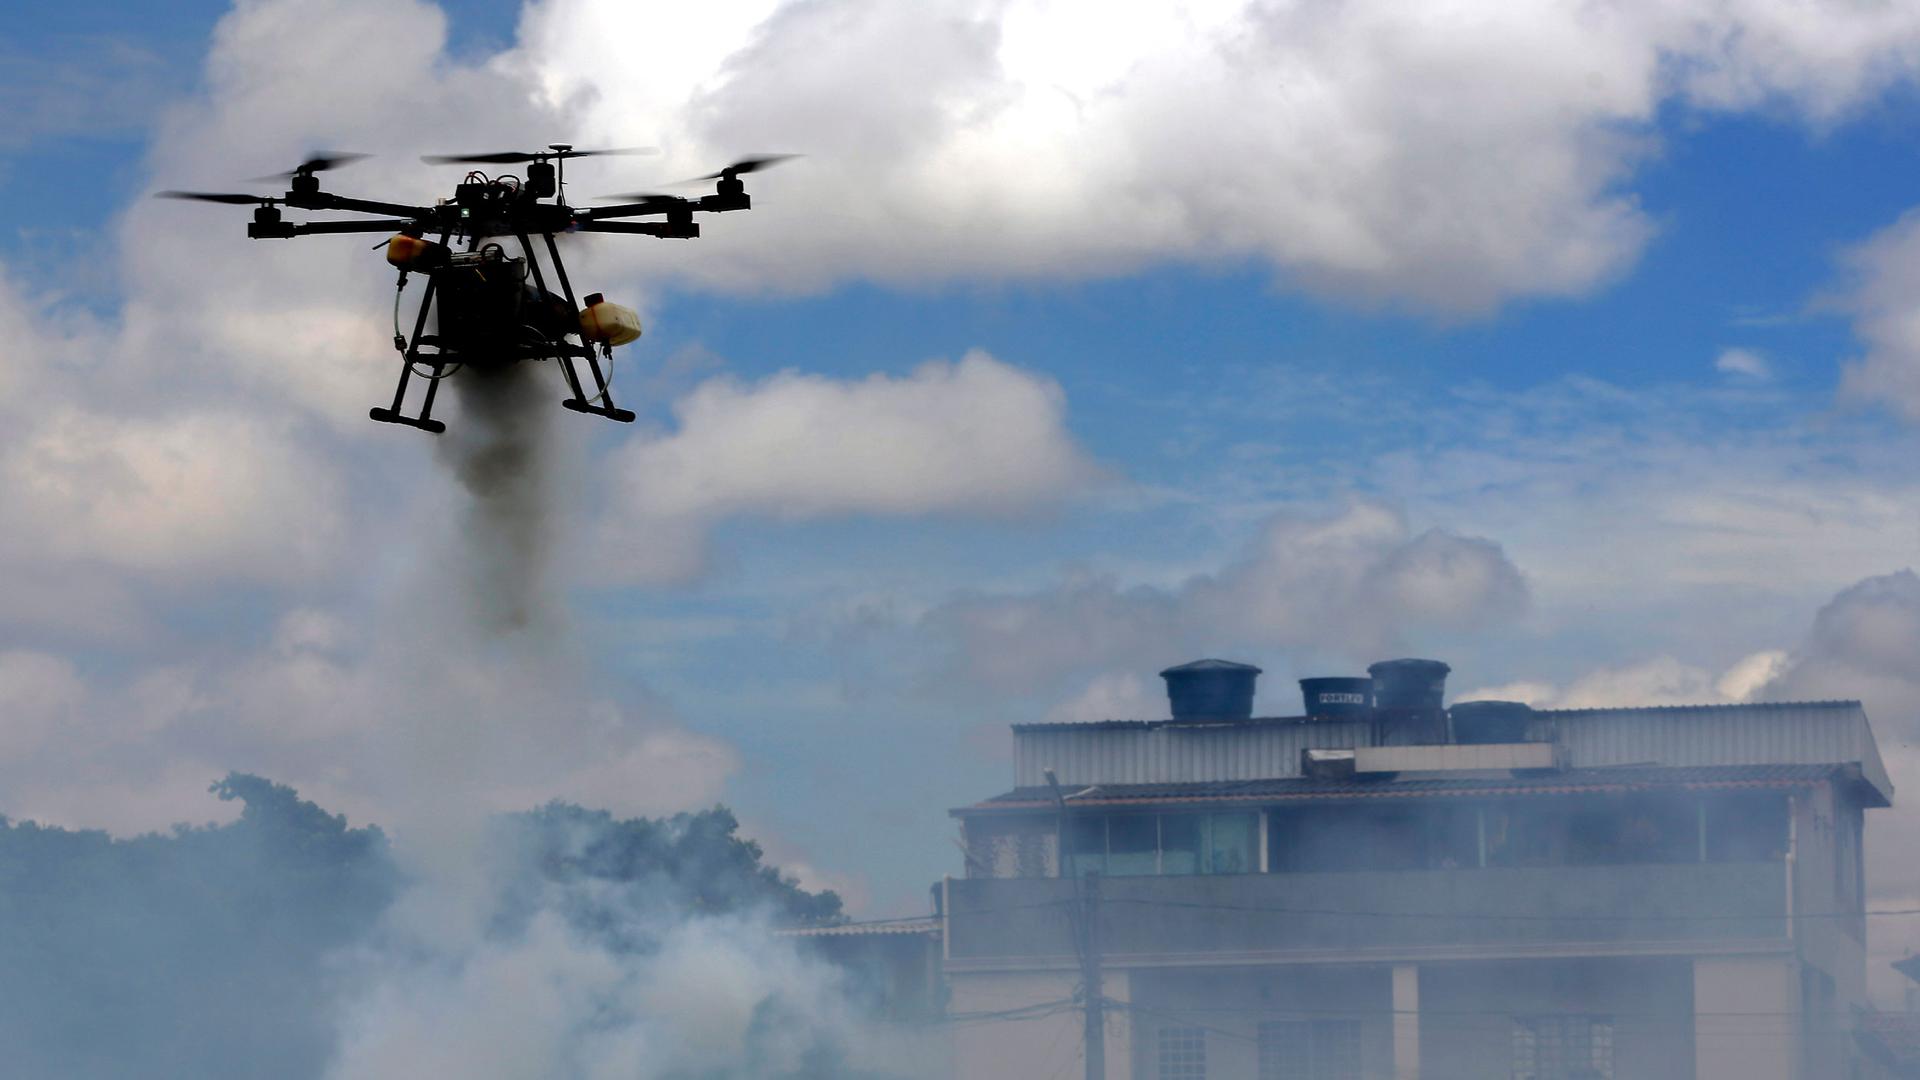 A drone sprays insecticide near homes on the outskirts of Brasilia, Brazil, Tuesday, Nov. 24, 2020. Brazil's health ministry launched a campaign to fight the Aedes aegypti mosquito, which transmits dengue, zika and chikungunya, diseases that can generate 